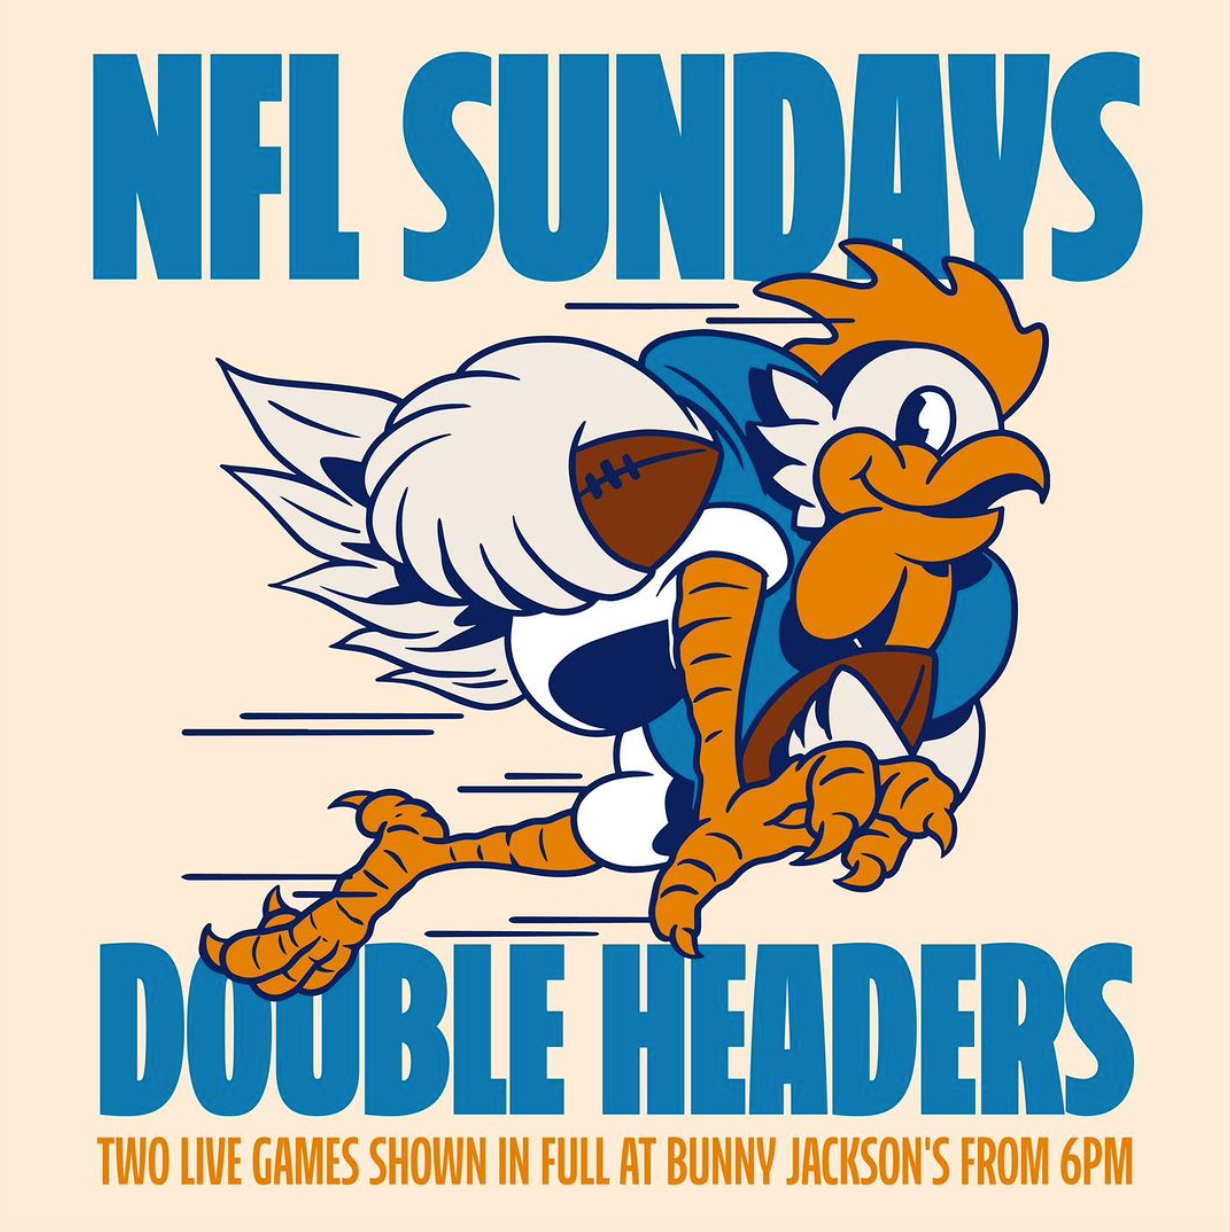 nfl sundays in manchester city centre